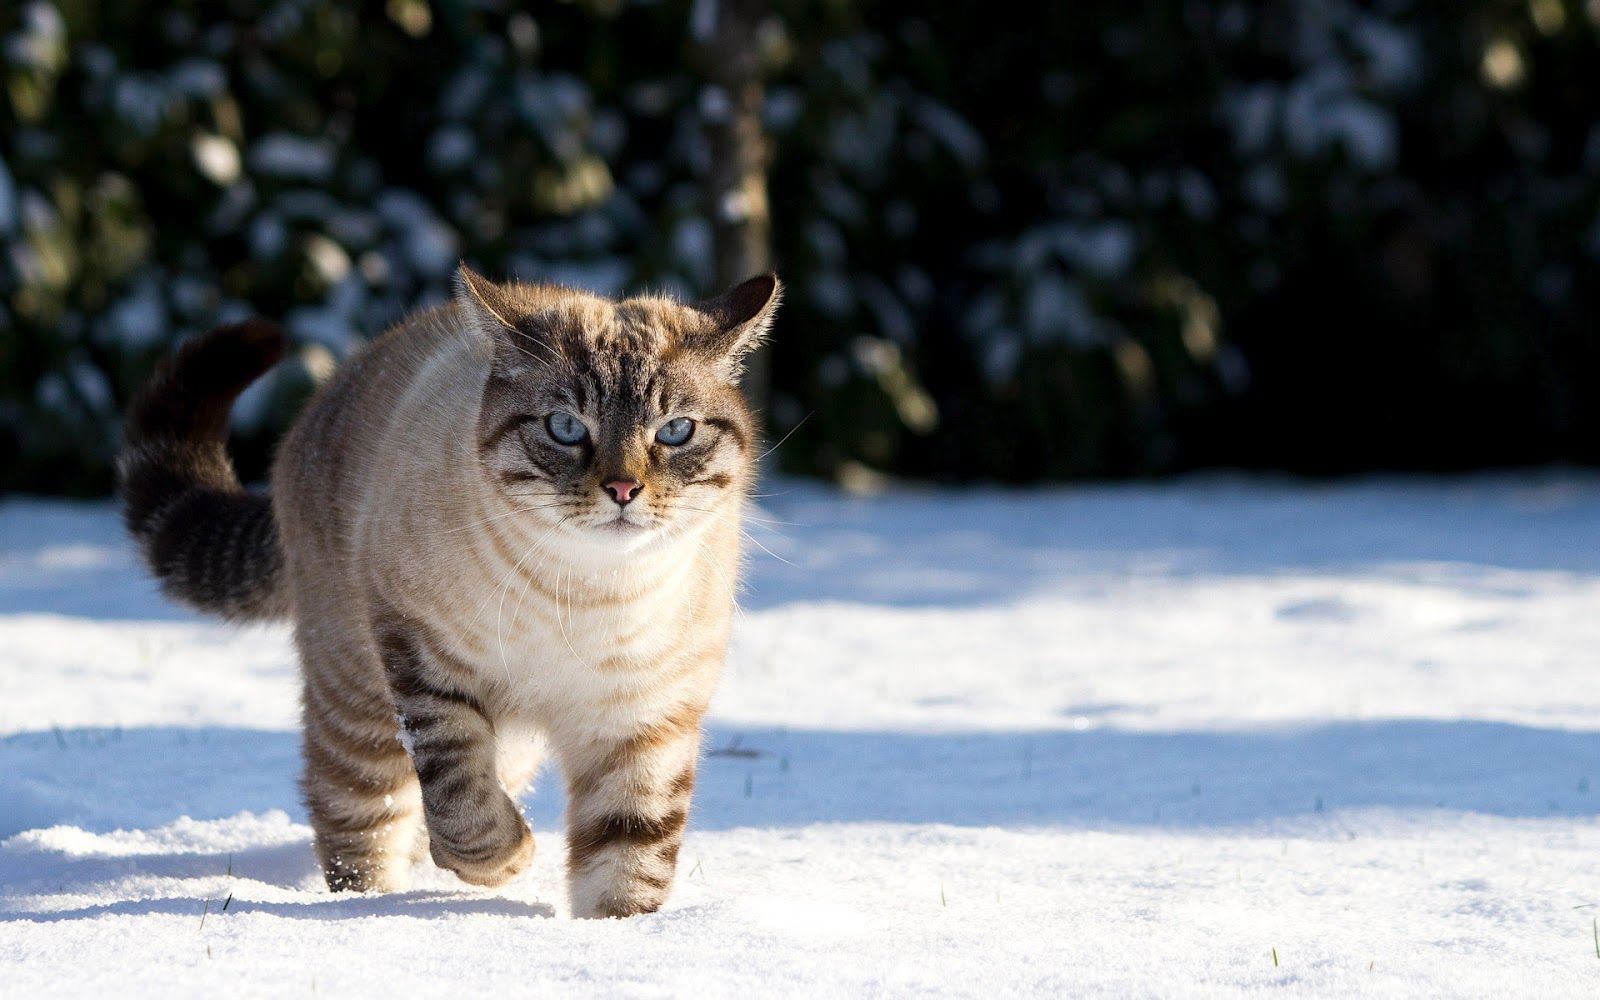 Winter wallpaper with cat in the snow. HD Animals Wallpaper. Kitten wallpaper, Cute cats and kittens, Winter cat